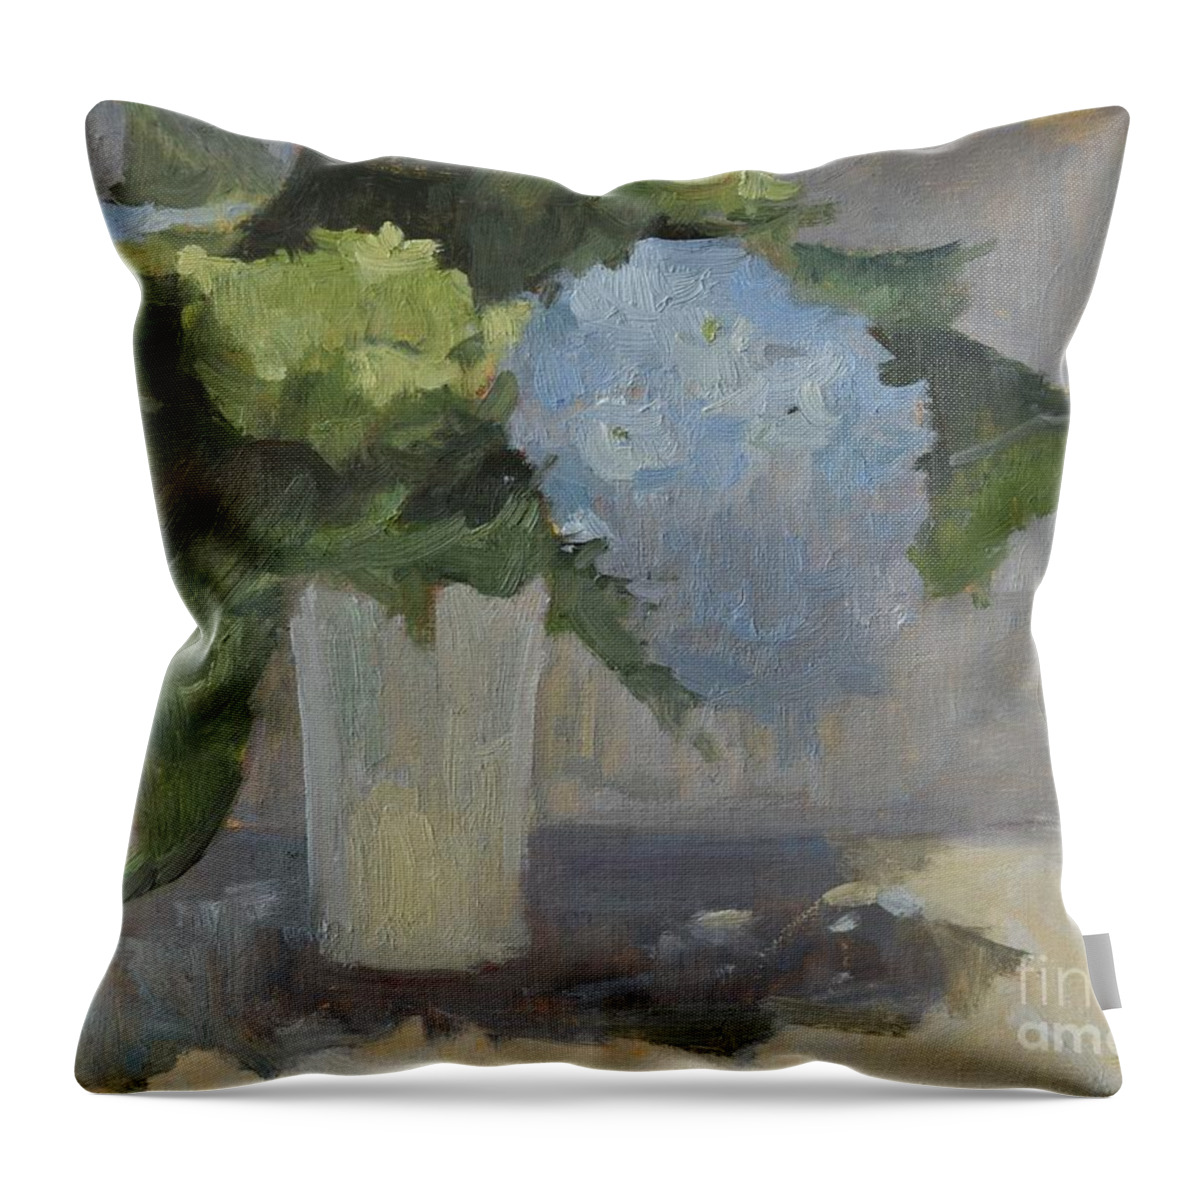 Hydrangea Throw Pillow featuring the painting Garden Blooms by Tiffany Foss